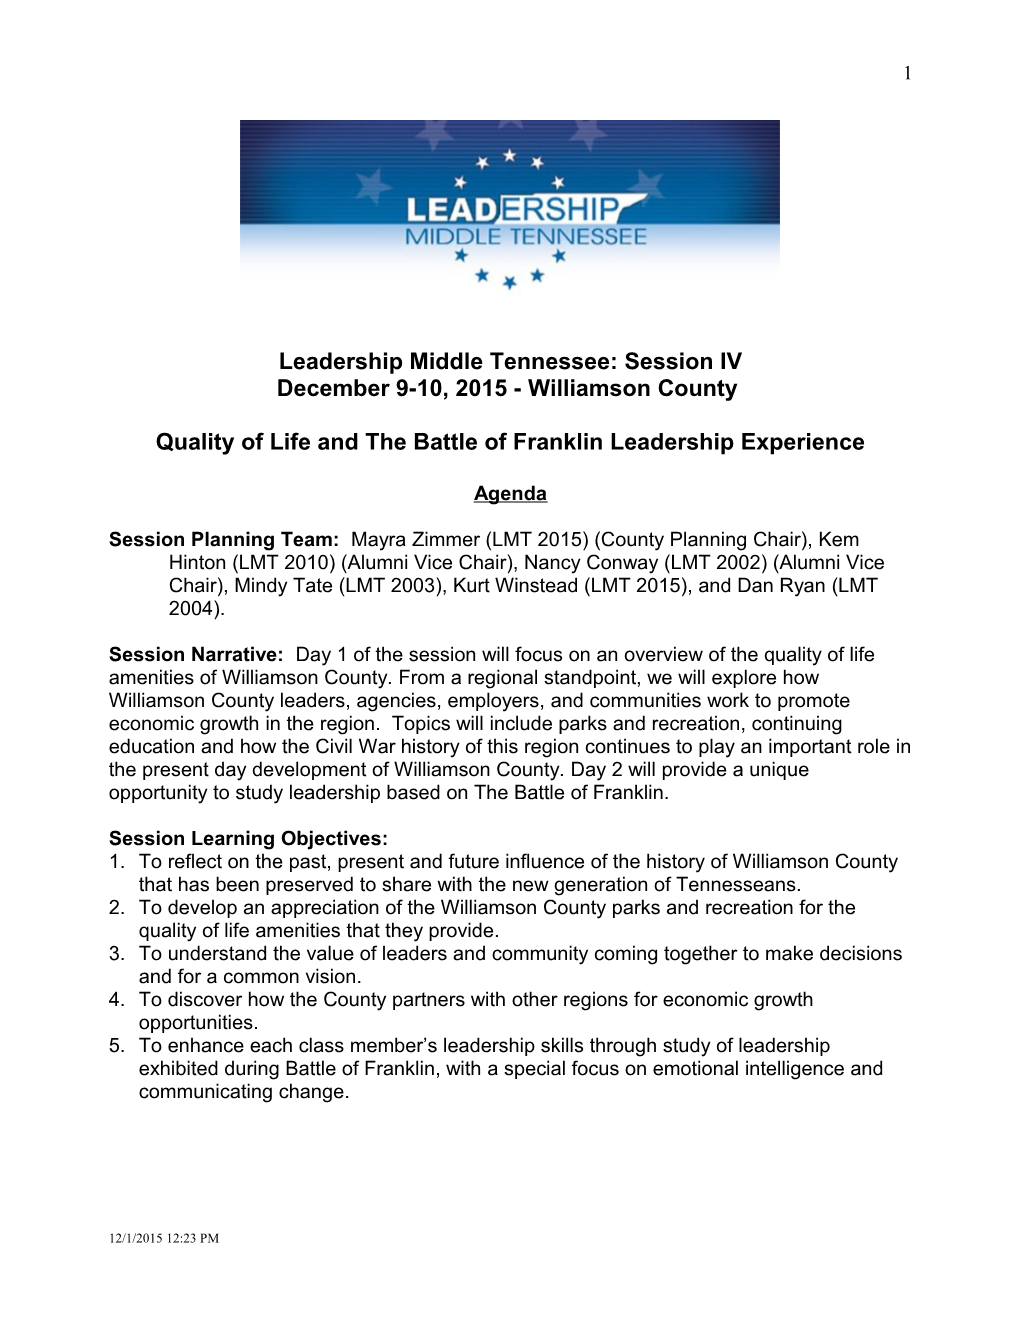 Leadership Middle Tennessee: Session IV